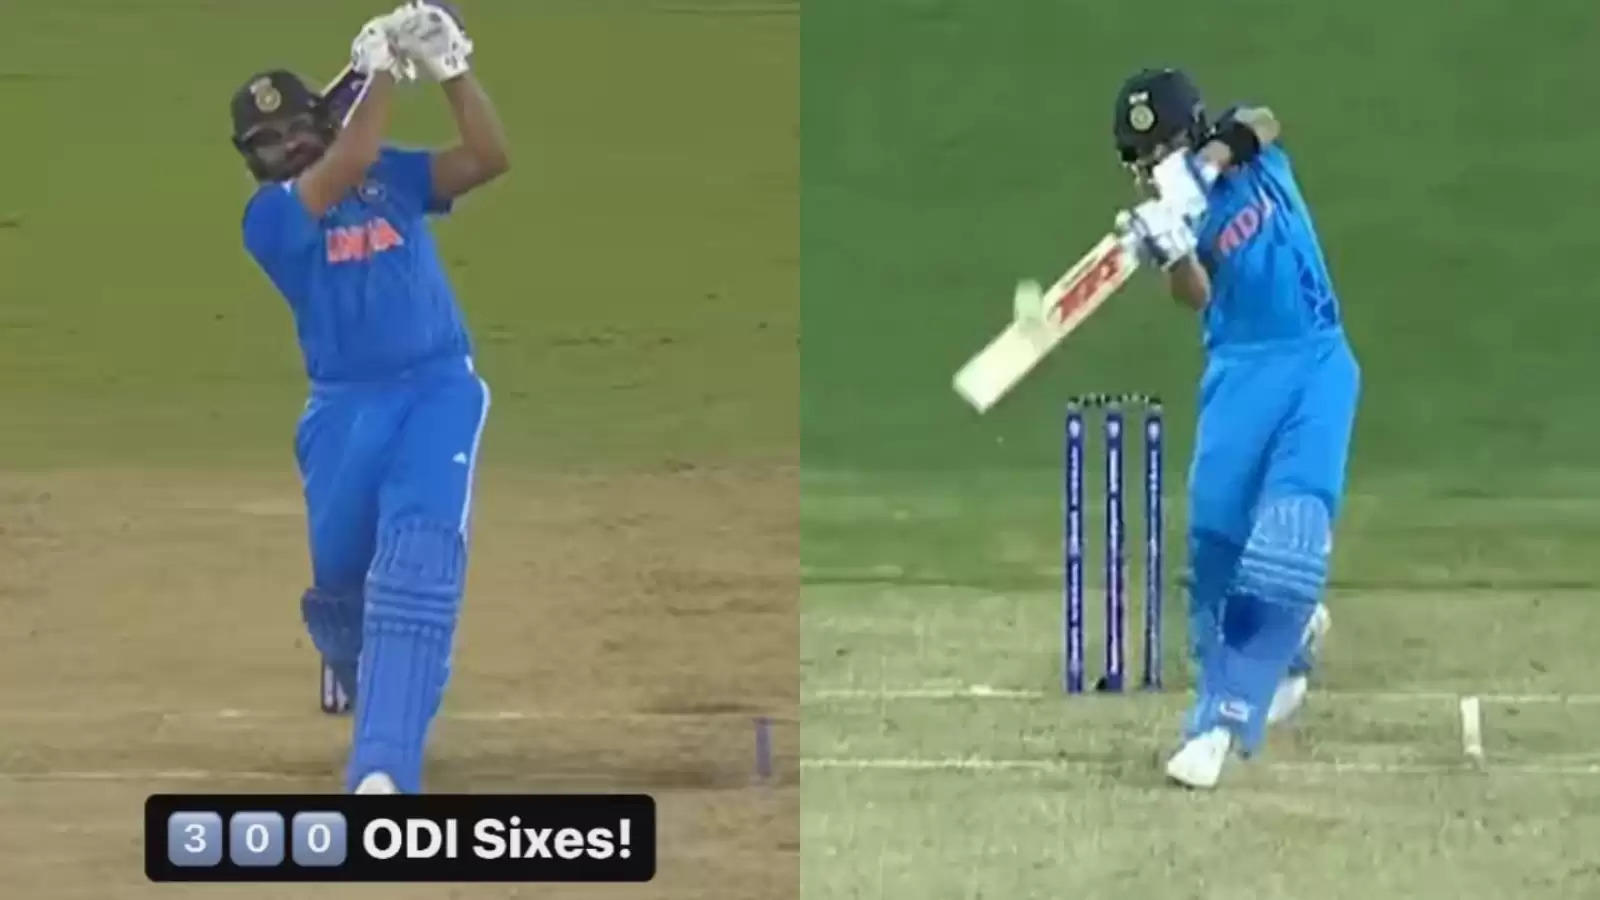 Rohit Sharma is a good player.